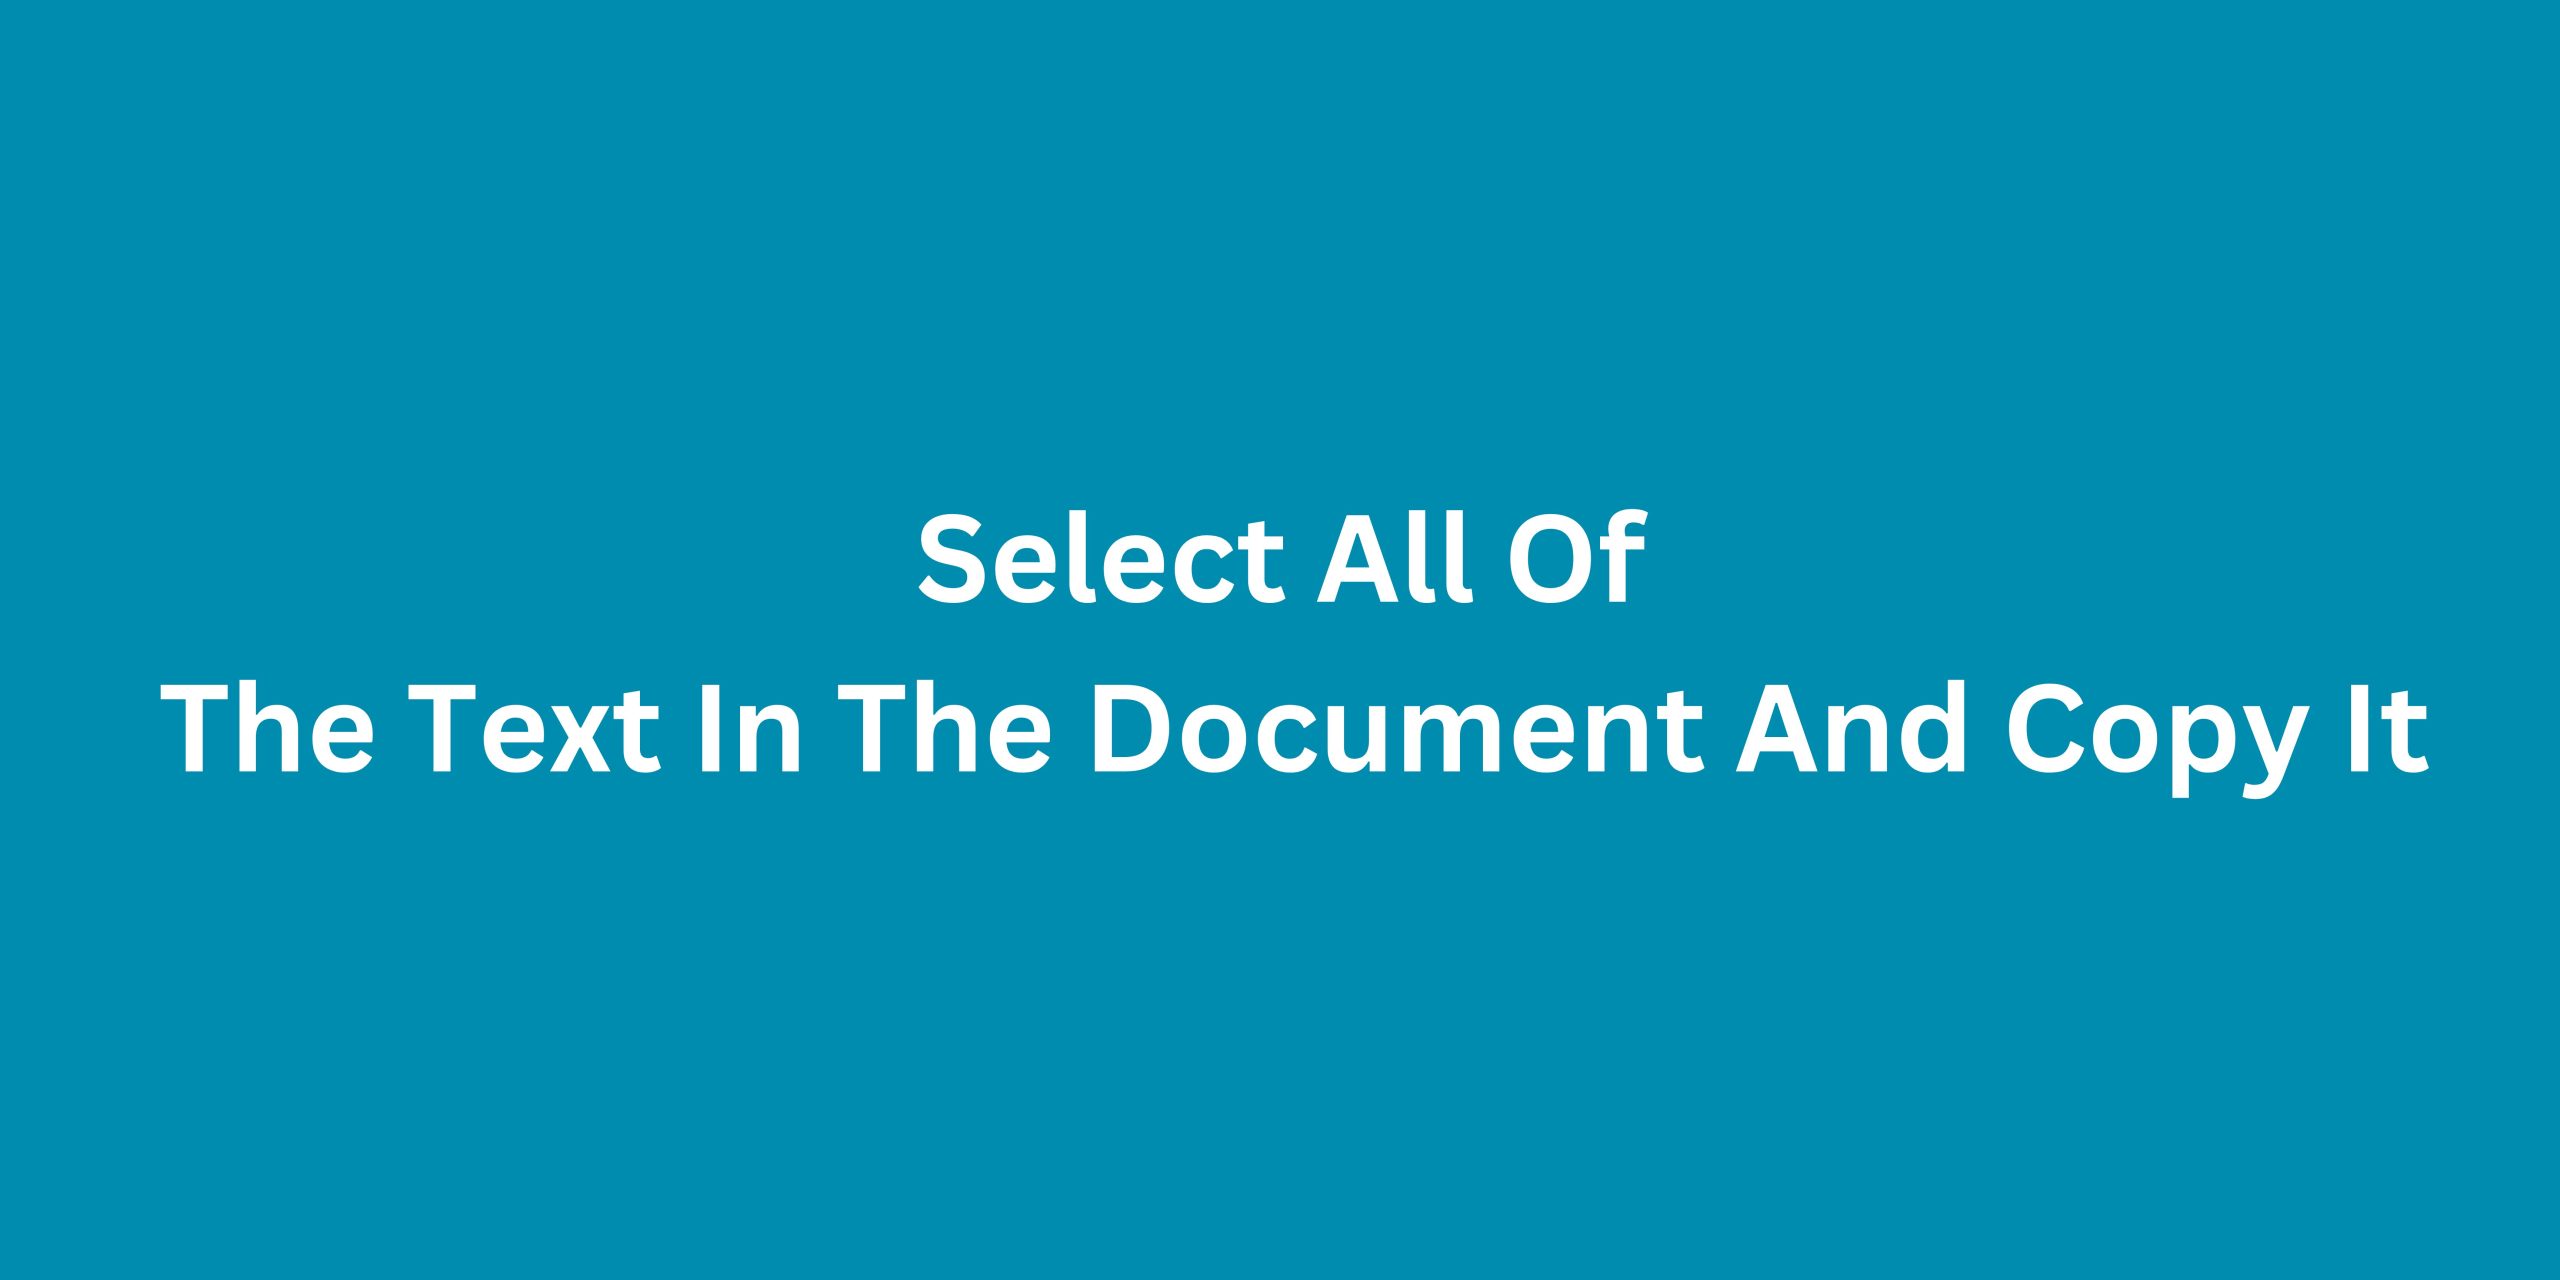 Select All Of The Text In The Document And Copy It